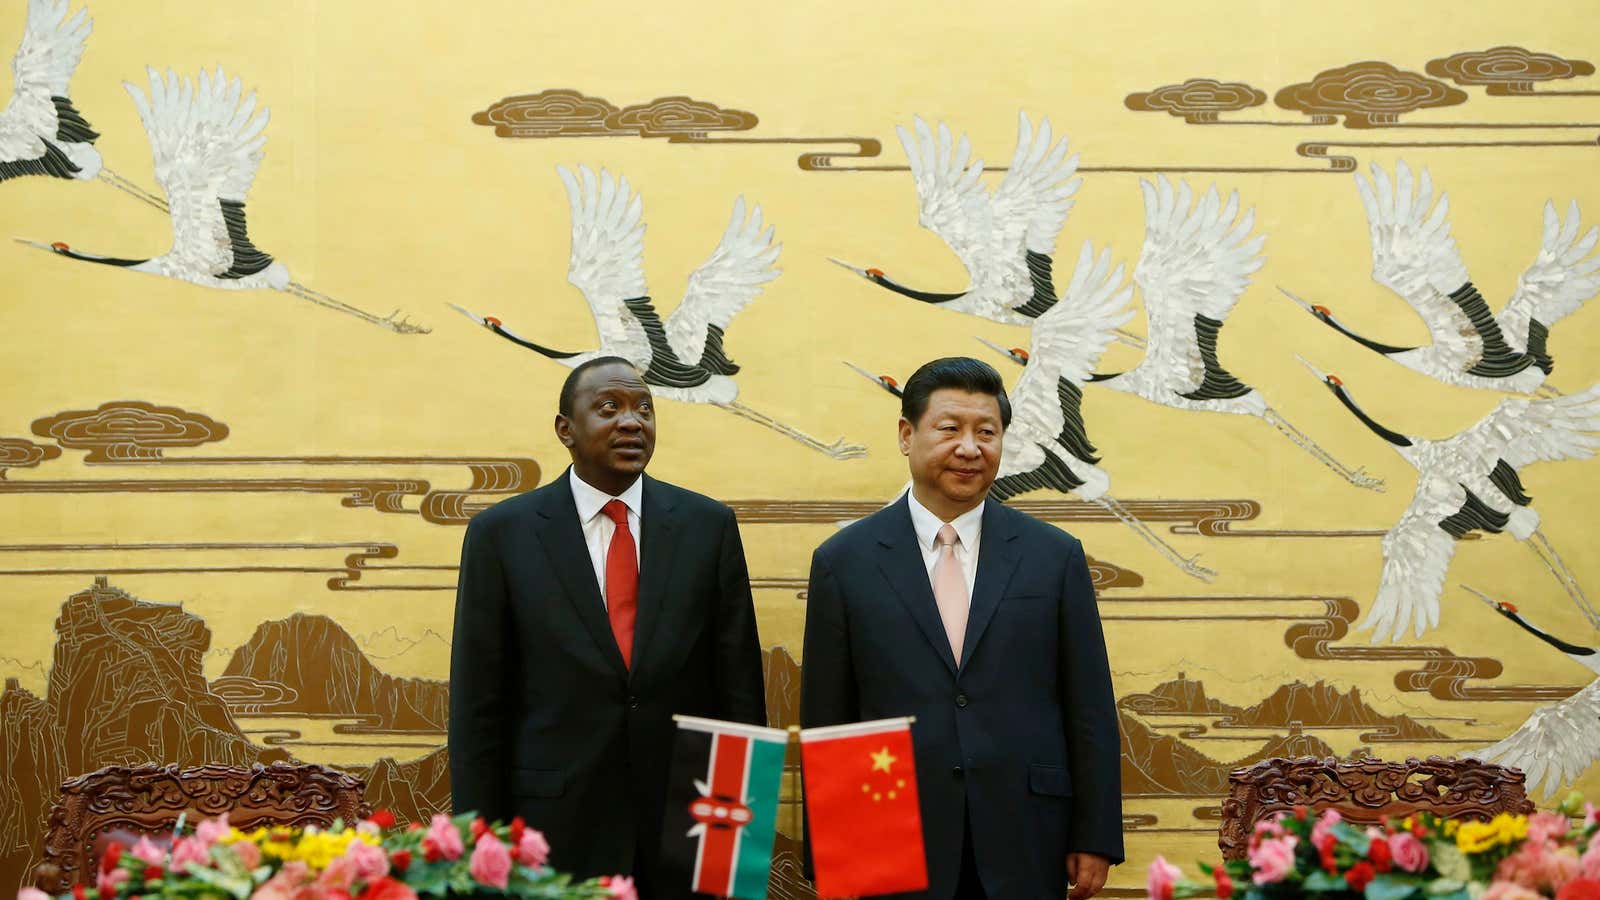 Kenyan President Uhuru Kenyatta (L ) and his Chinese counterpart Xi Jinping stand together during a signing ceremony at the Great Hall of the People in Beijing in 2013.